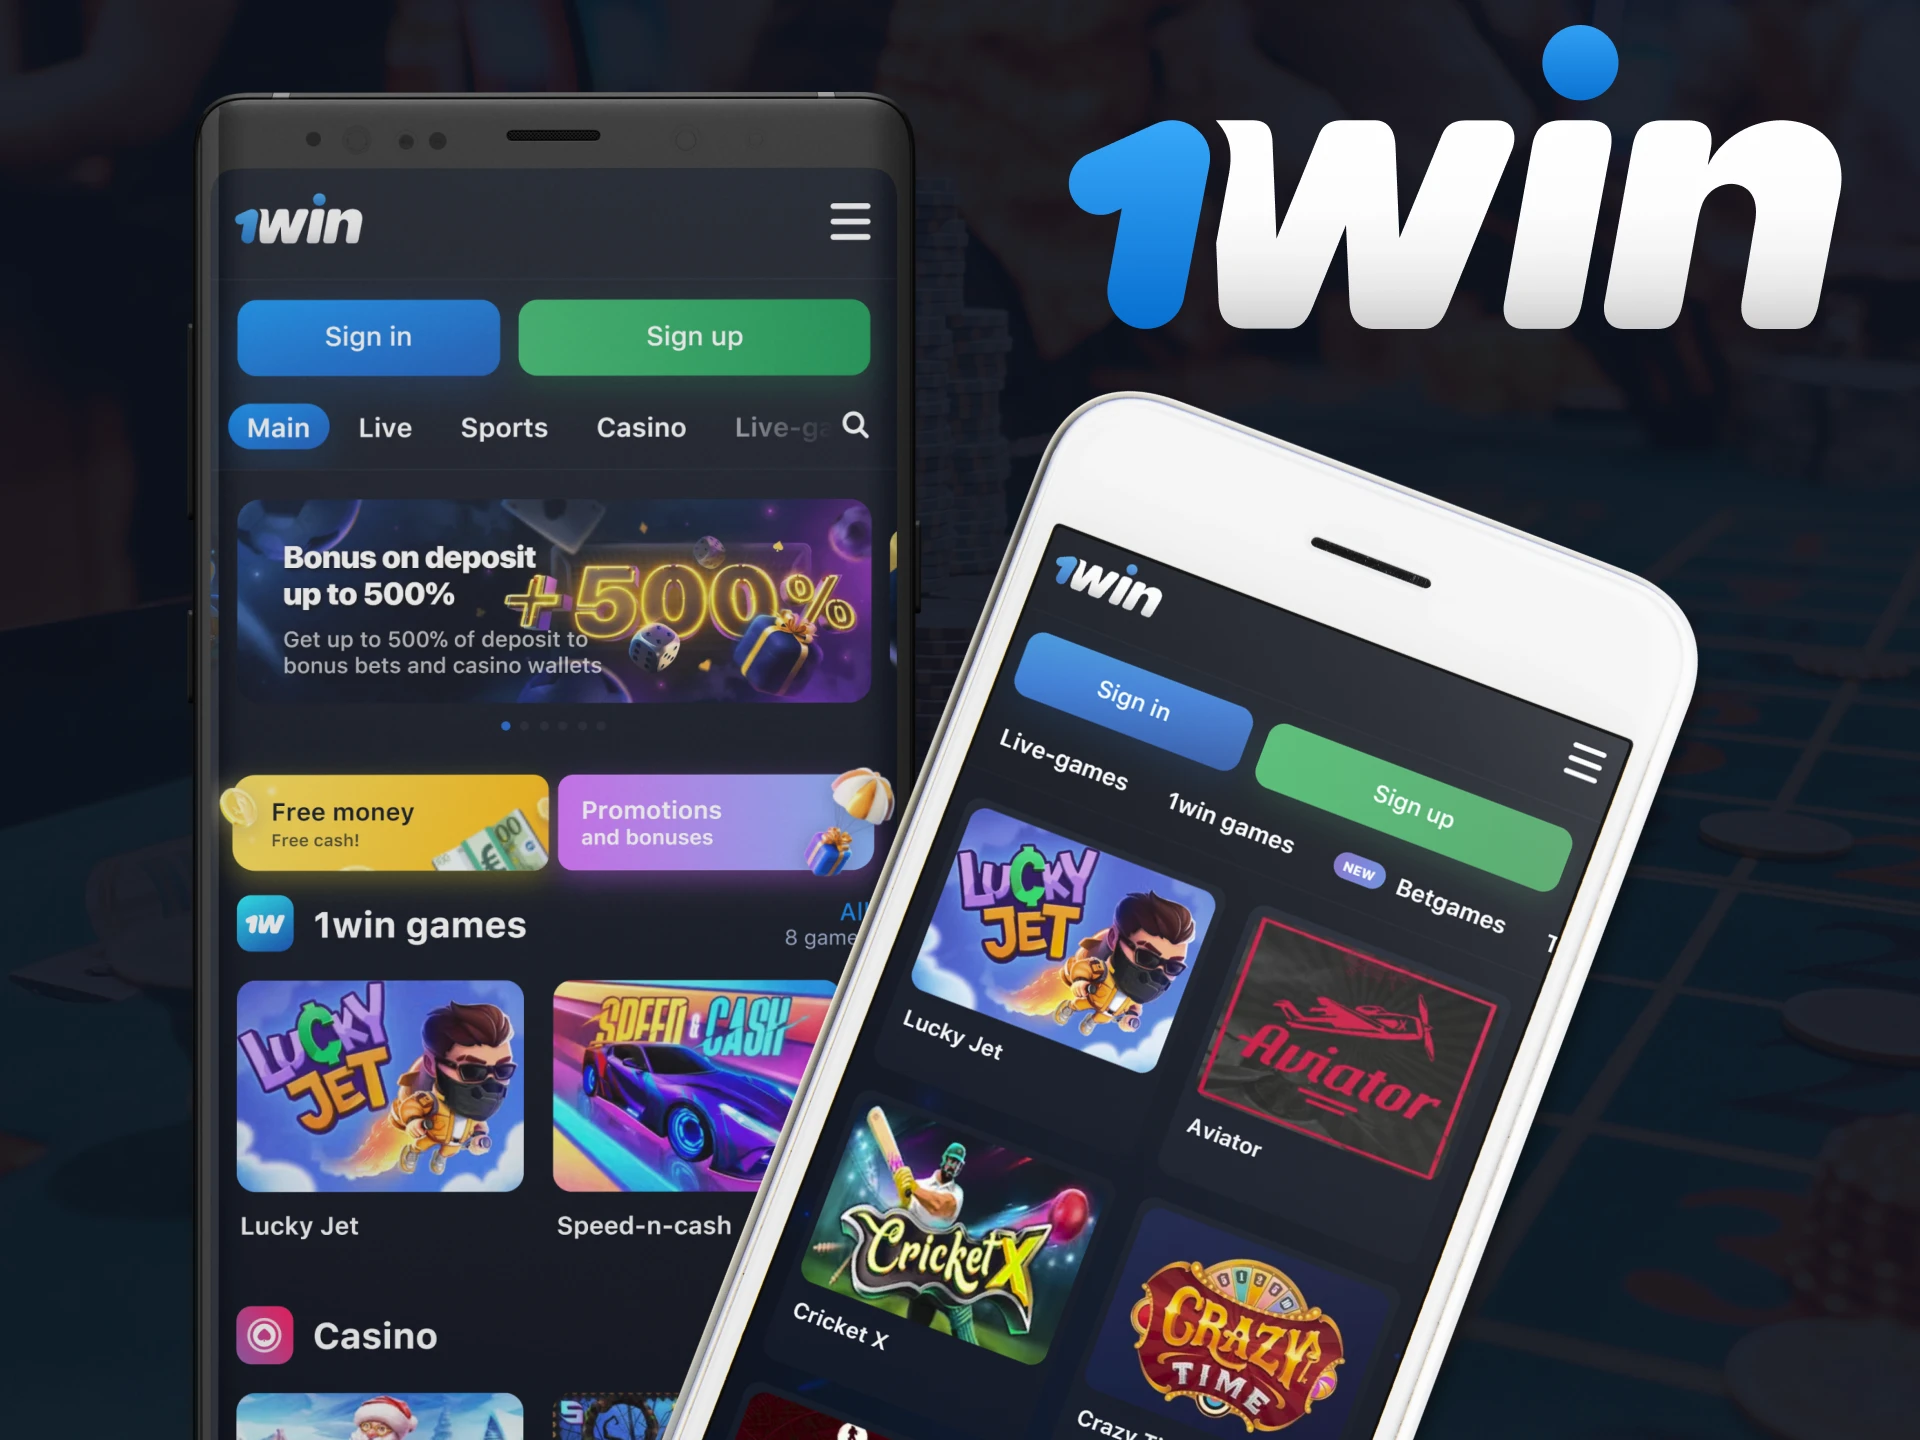 Play casino games on the 1Win app from any phone.